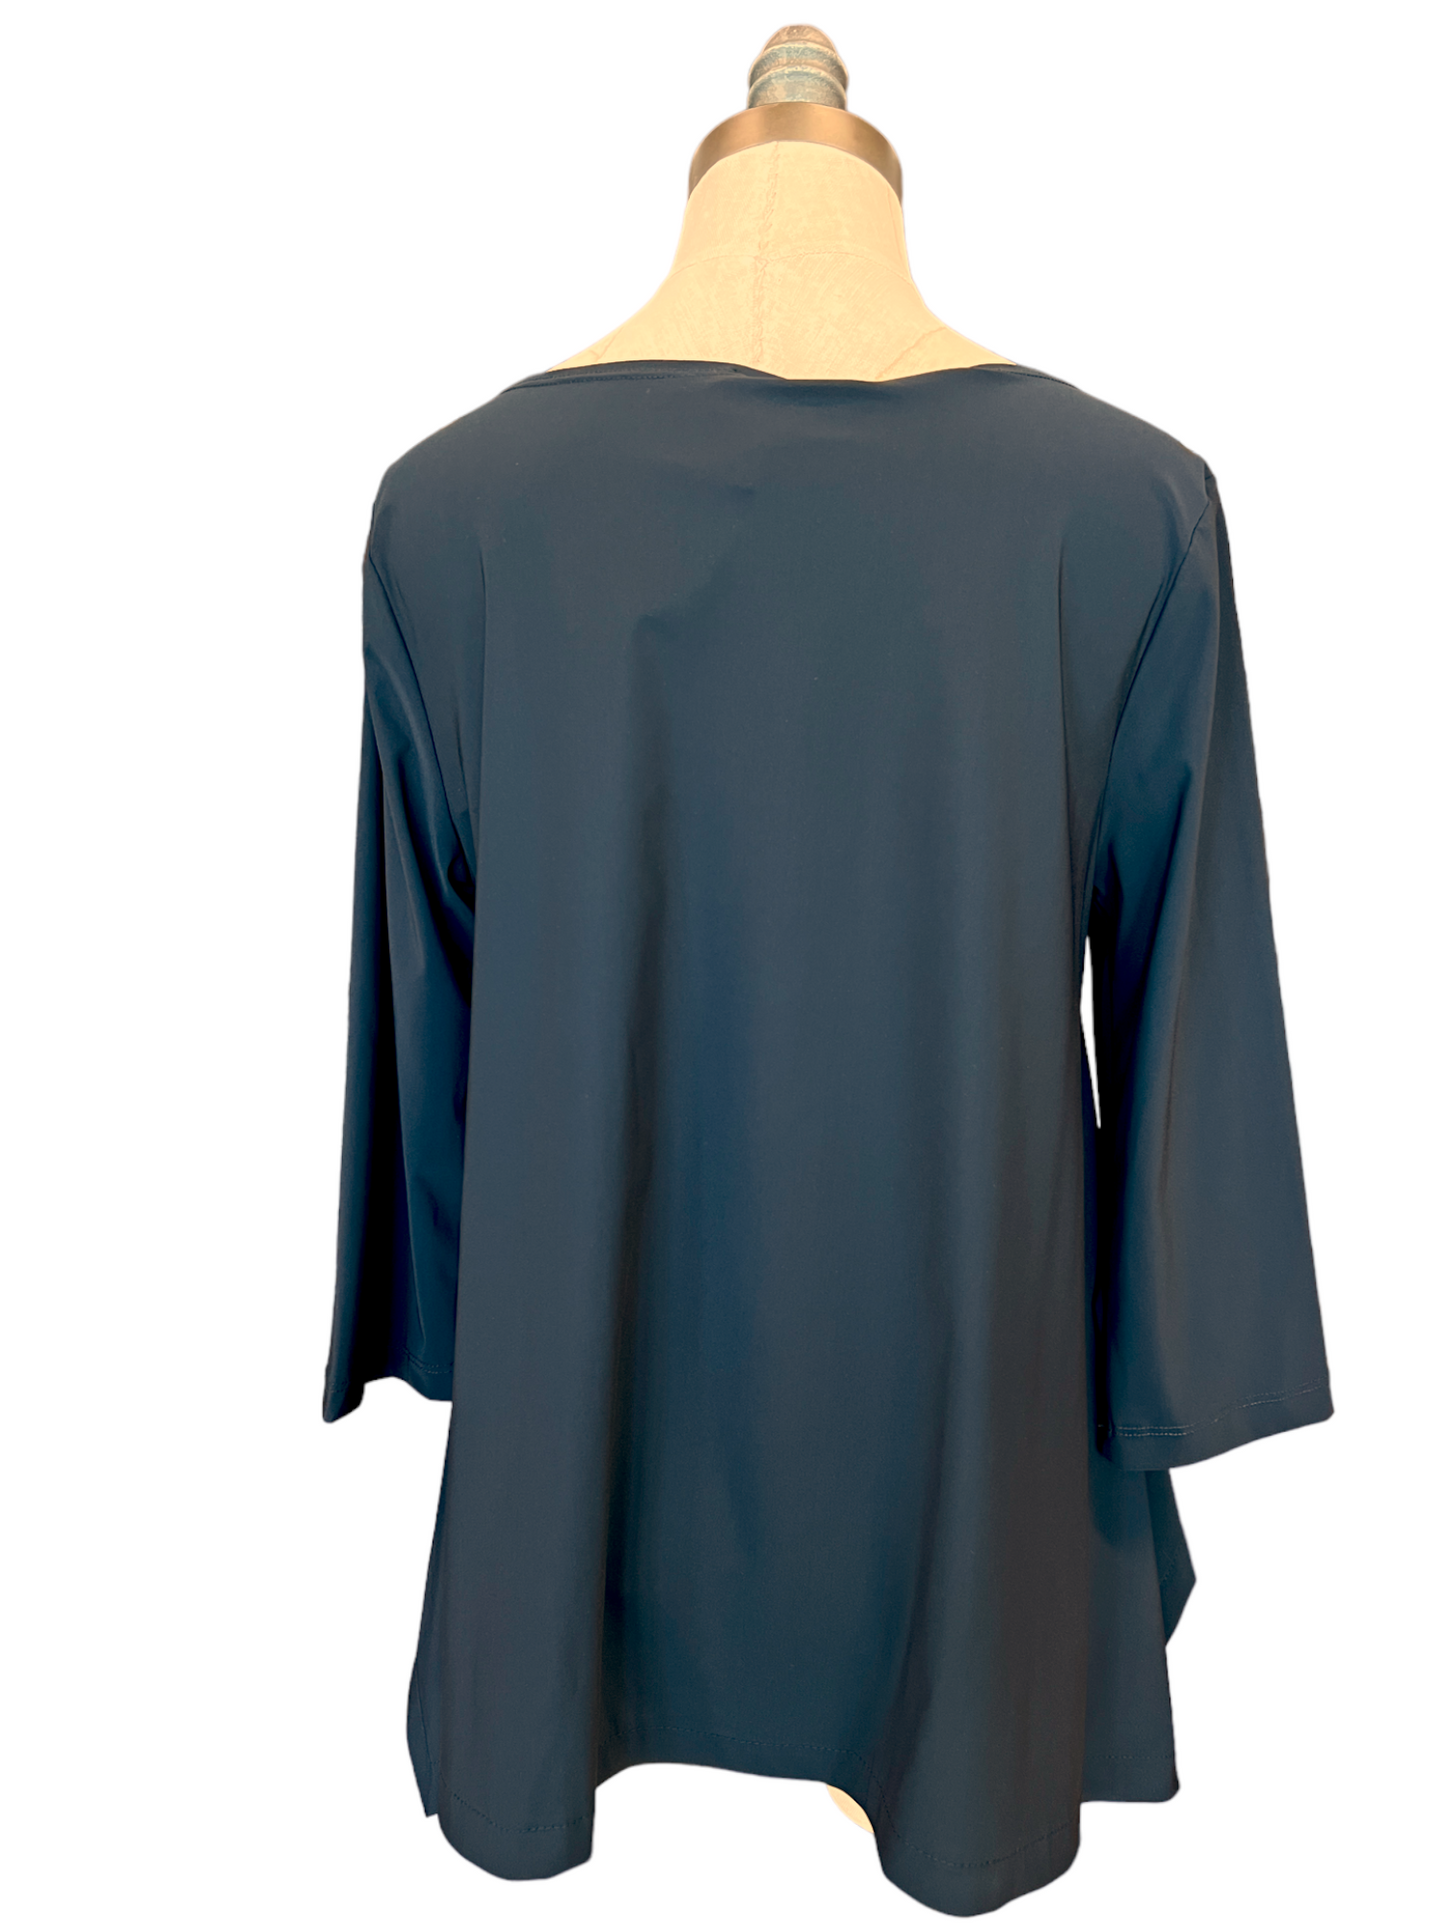 Maxime Top in Black